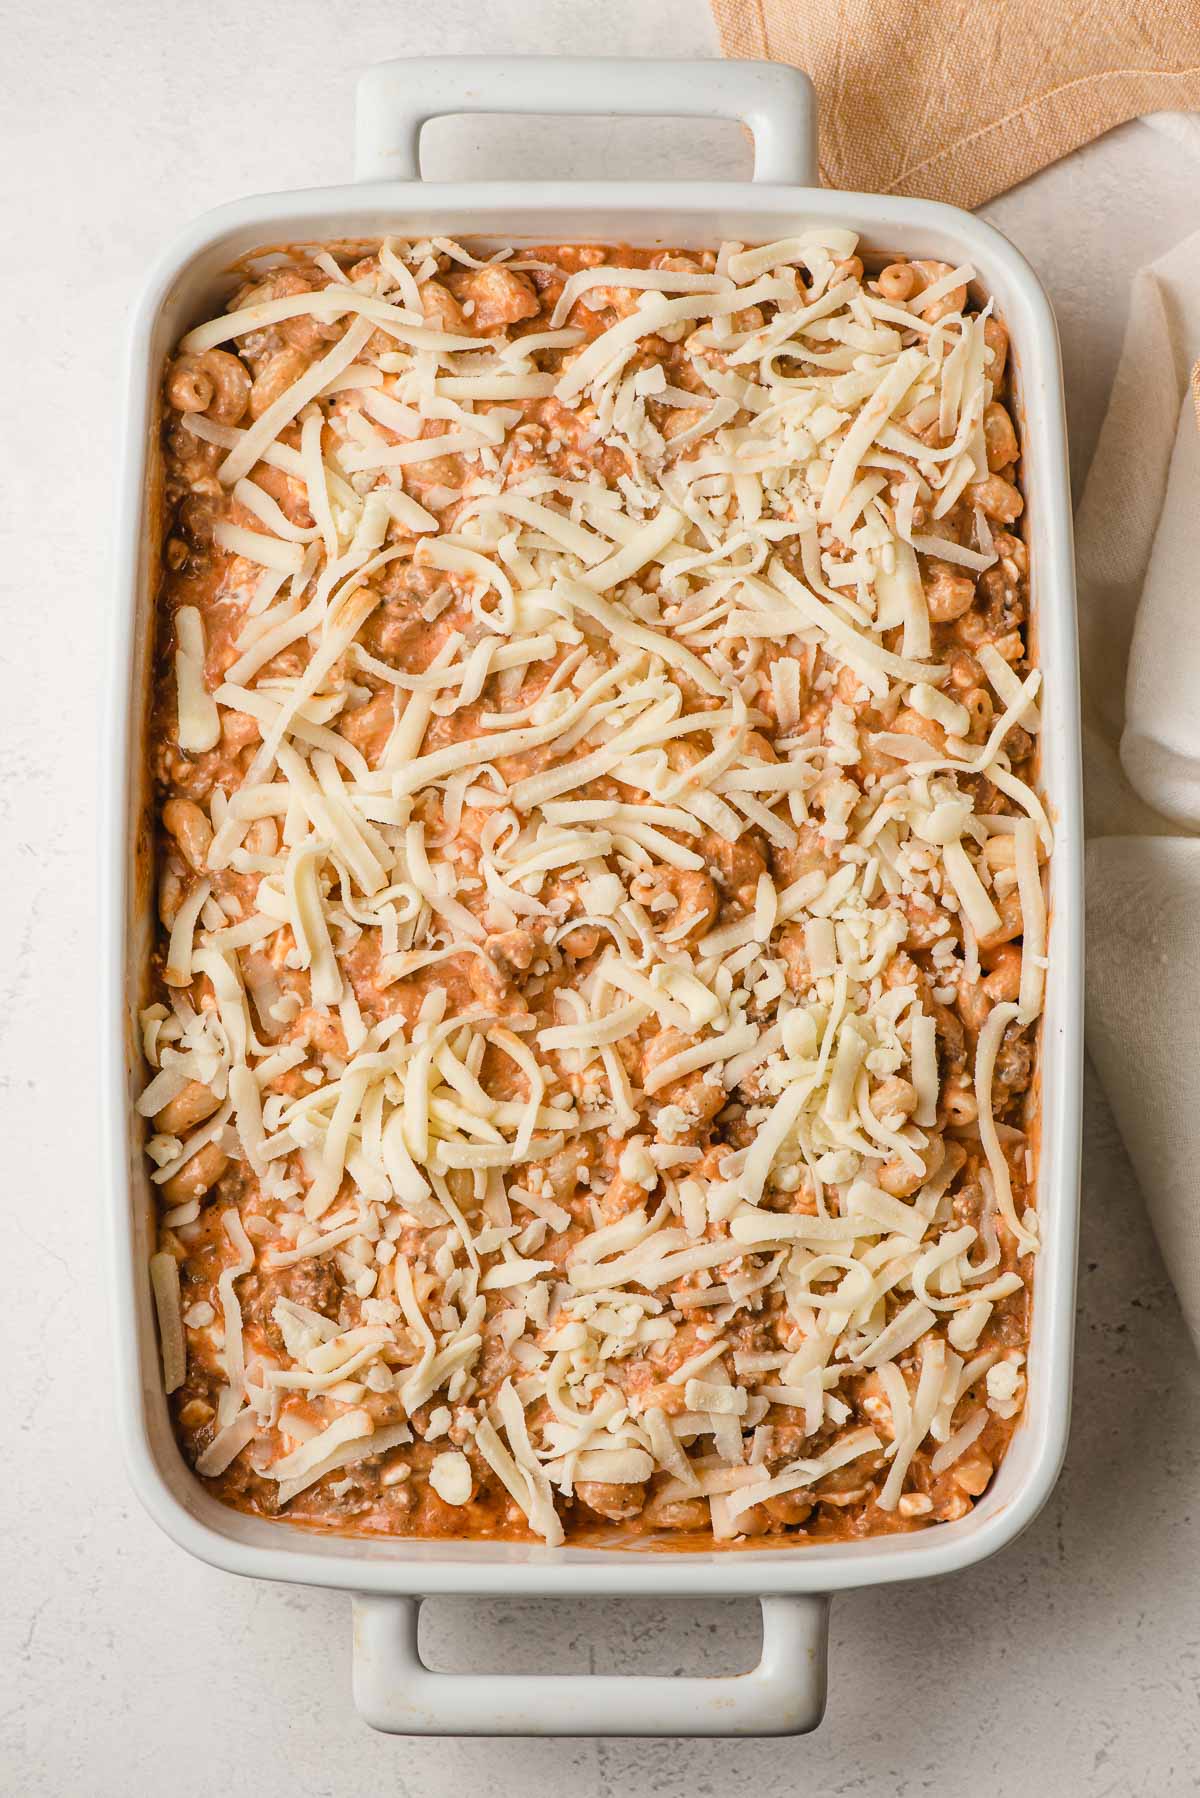 Ground beef pasta casserole covered with mozzarella cheese, before baking.